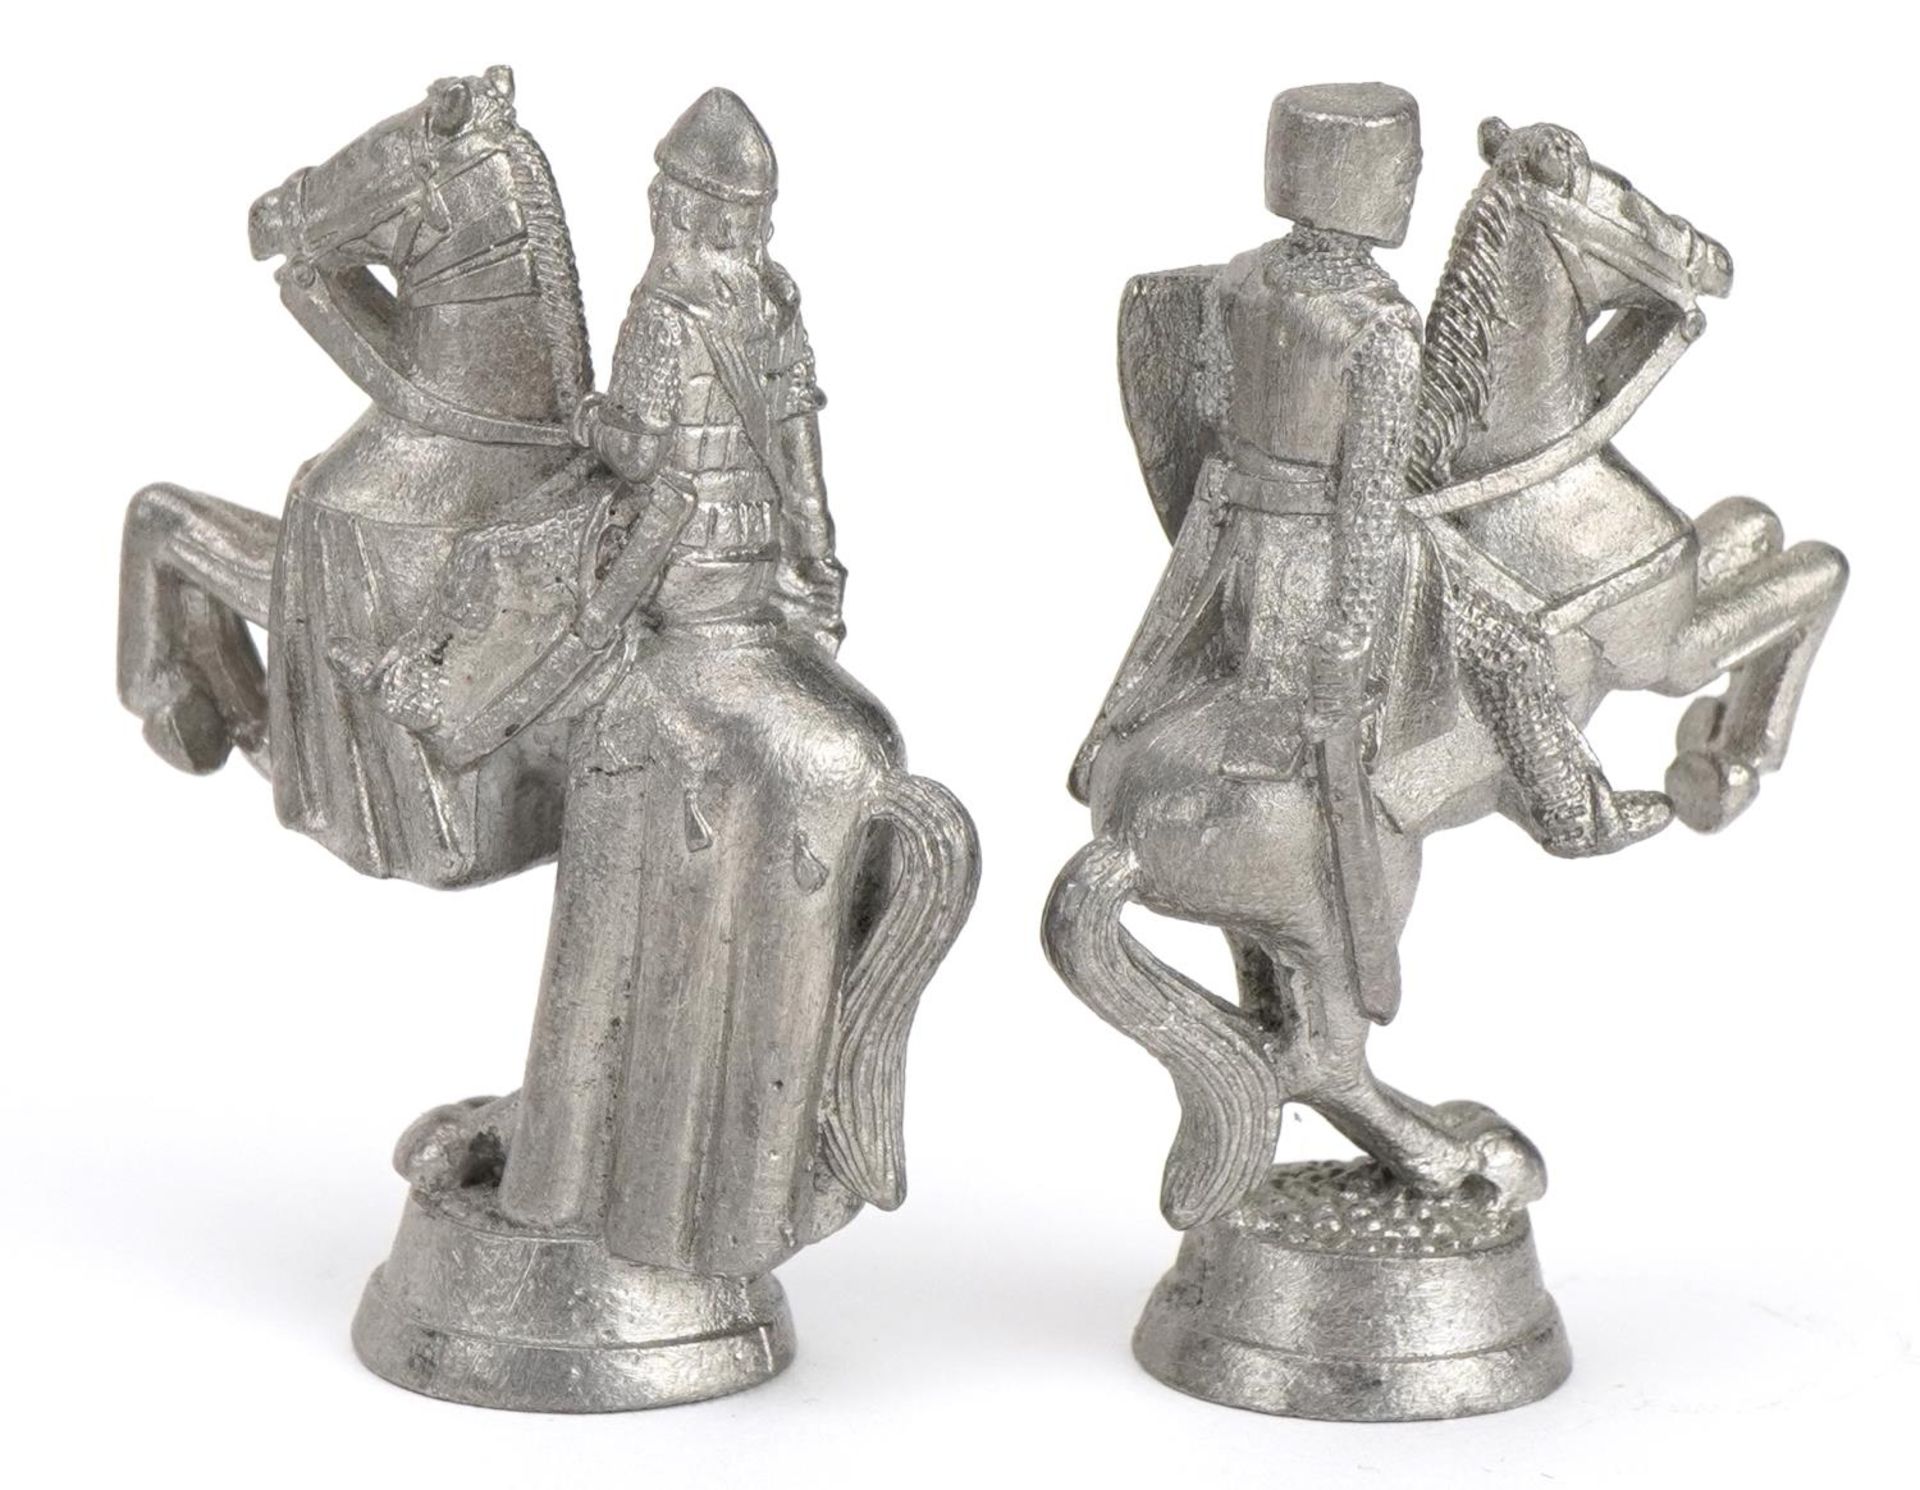 White metal medieval design chess set, the largest pieces 6.5cm high - Image 5 of 6